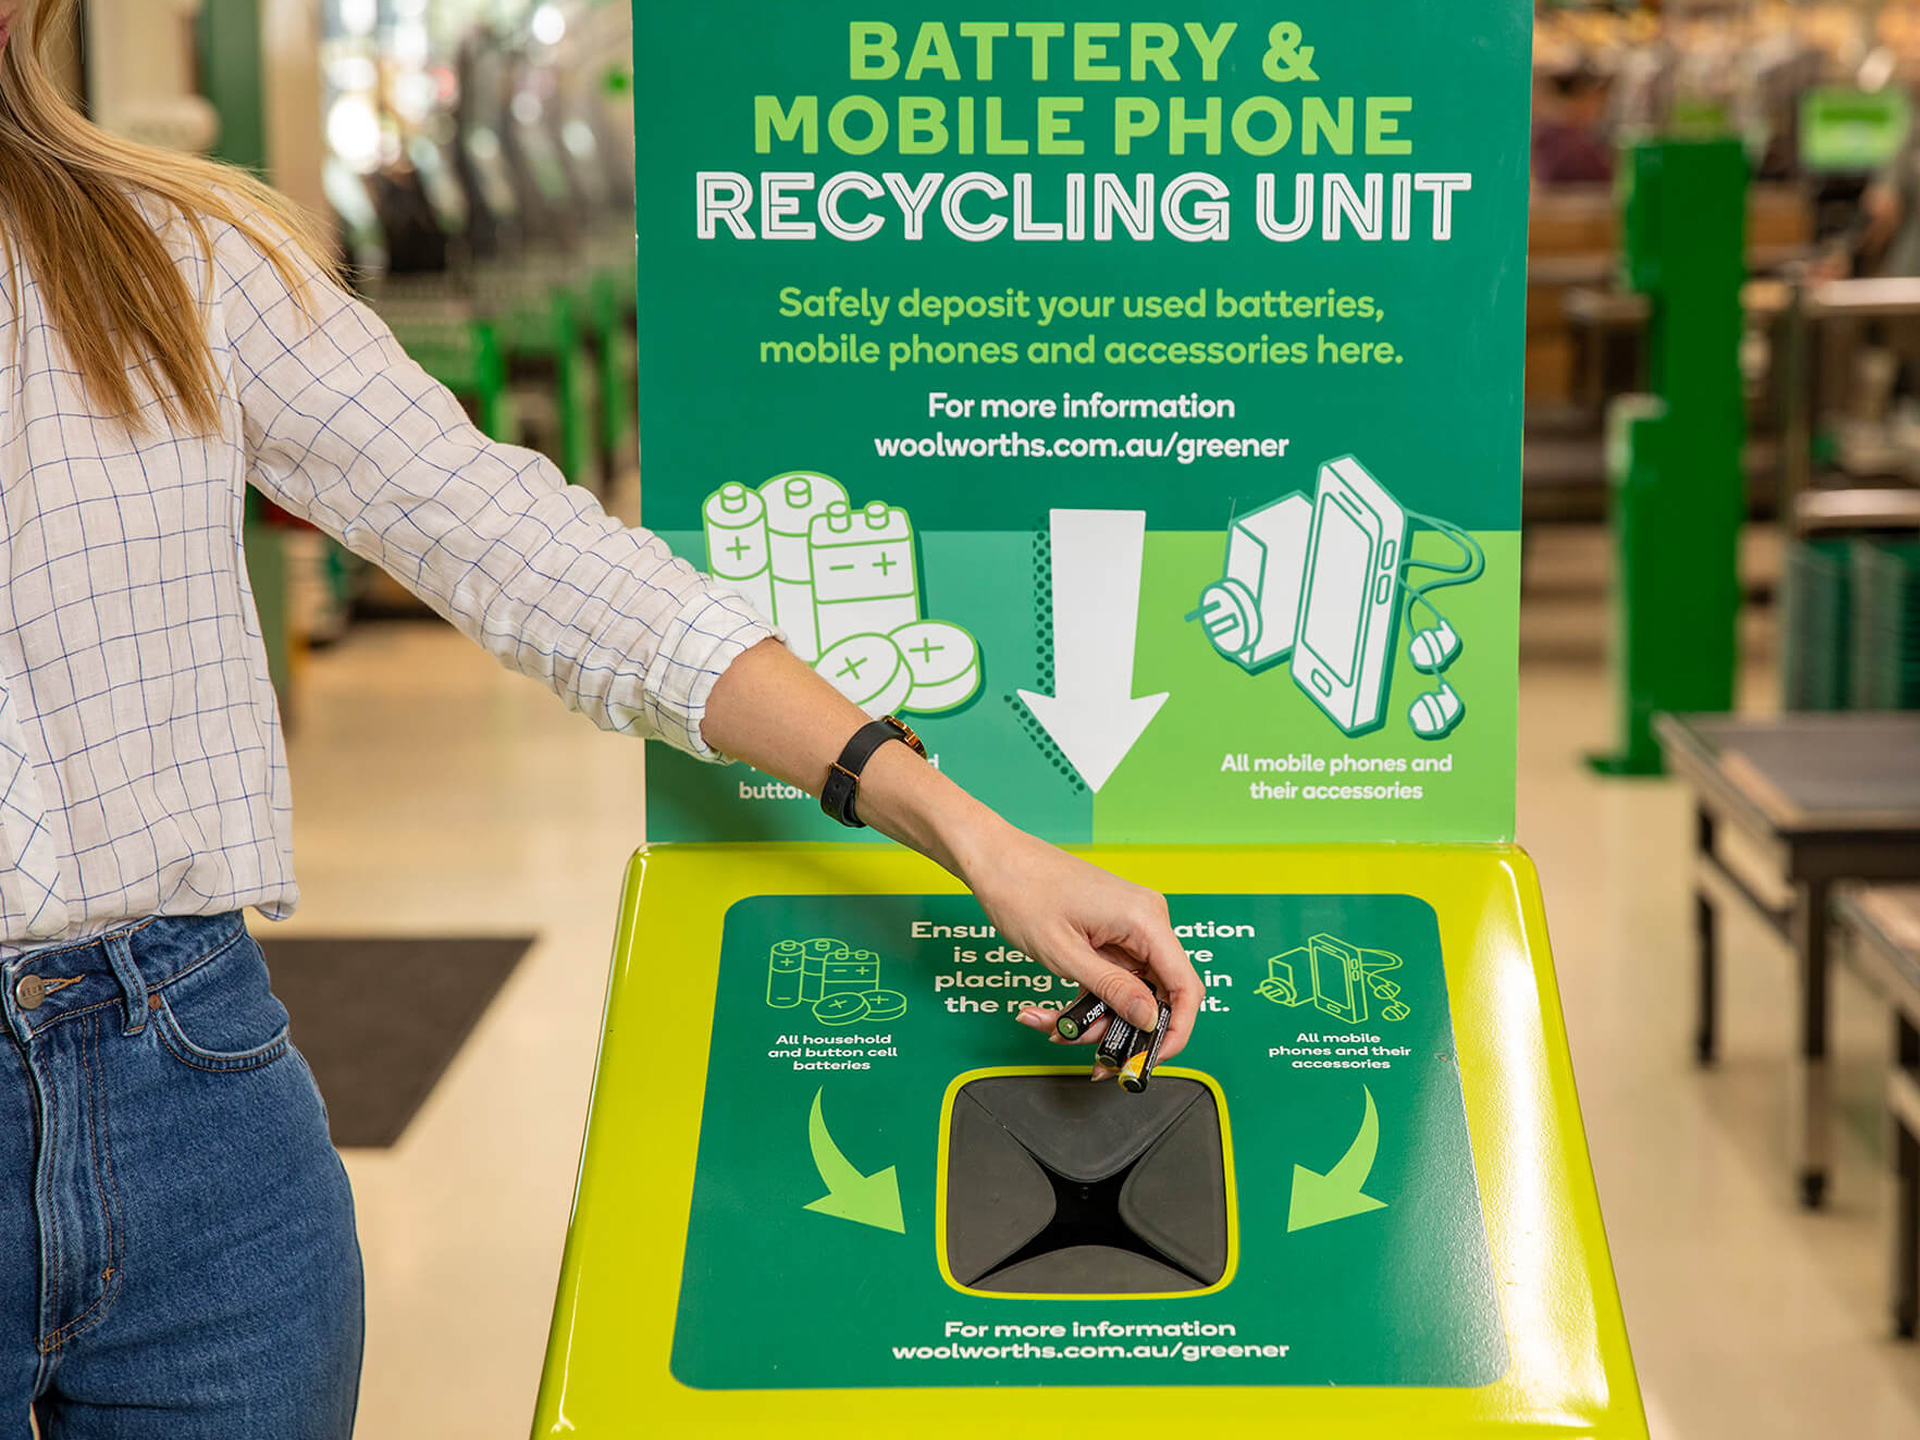 Battery Recycling. Phone Recycling. Recycling point. Ultra mobile points of recyclables. Recycle batteries